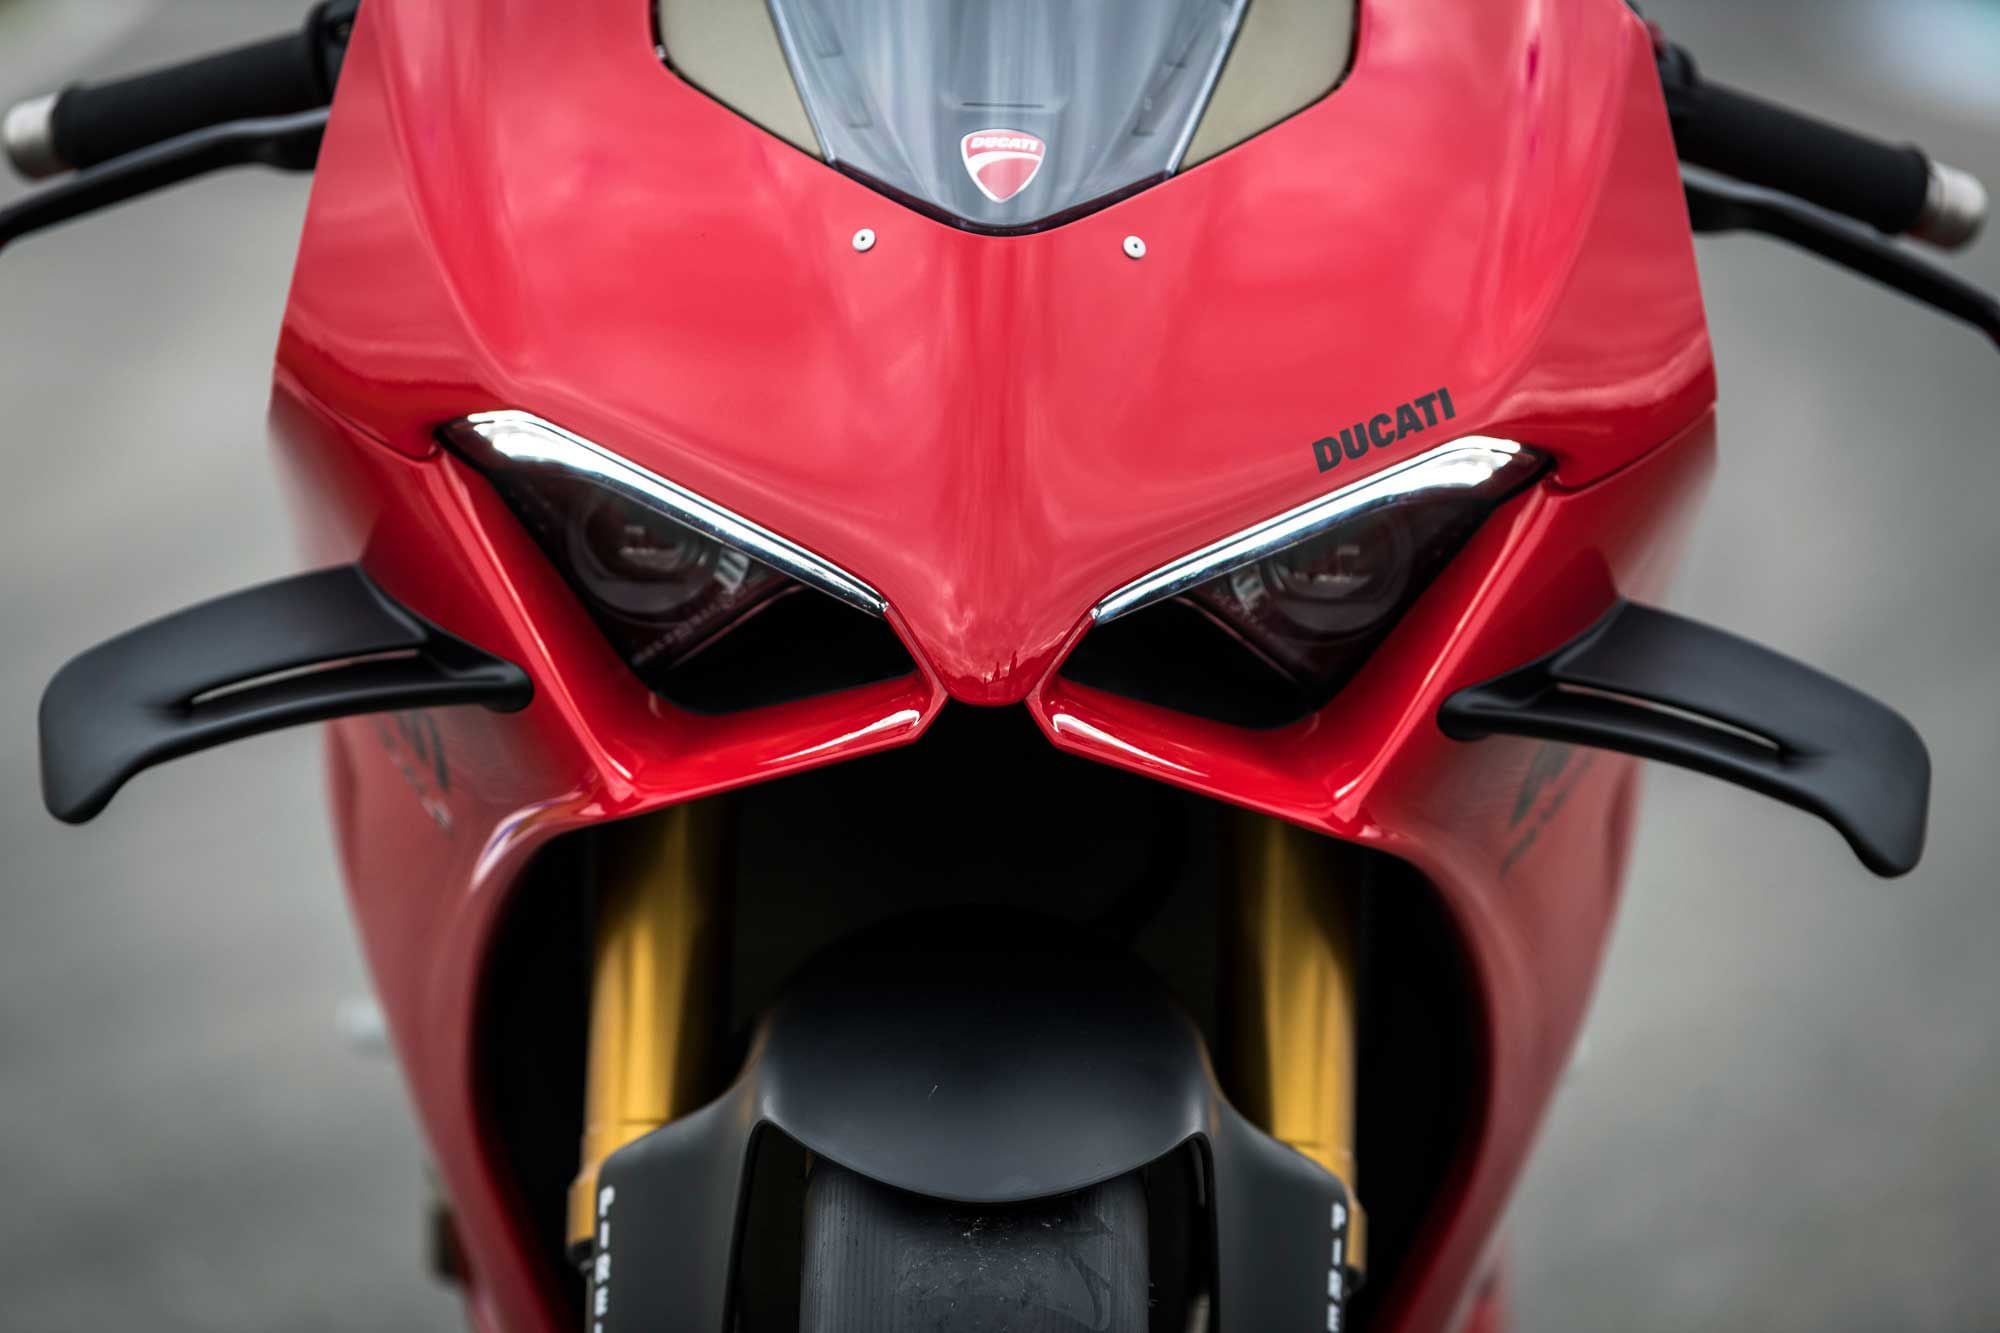 The winglets were reshaped to reduce drag. Ducati says they produce the same amount of downforce at speed.